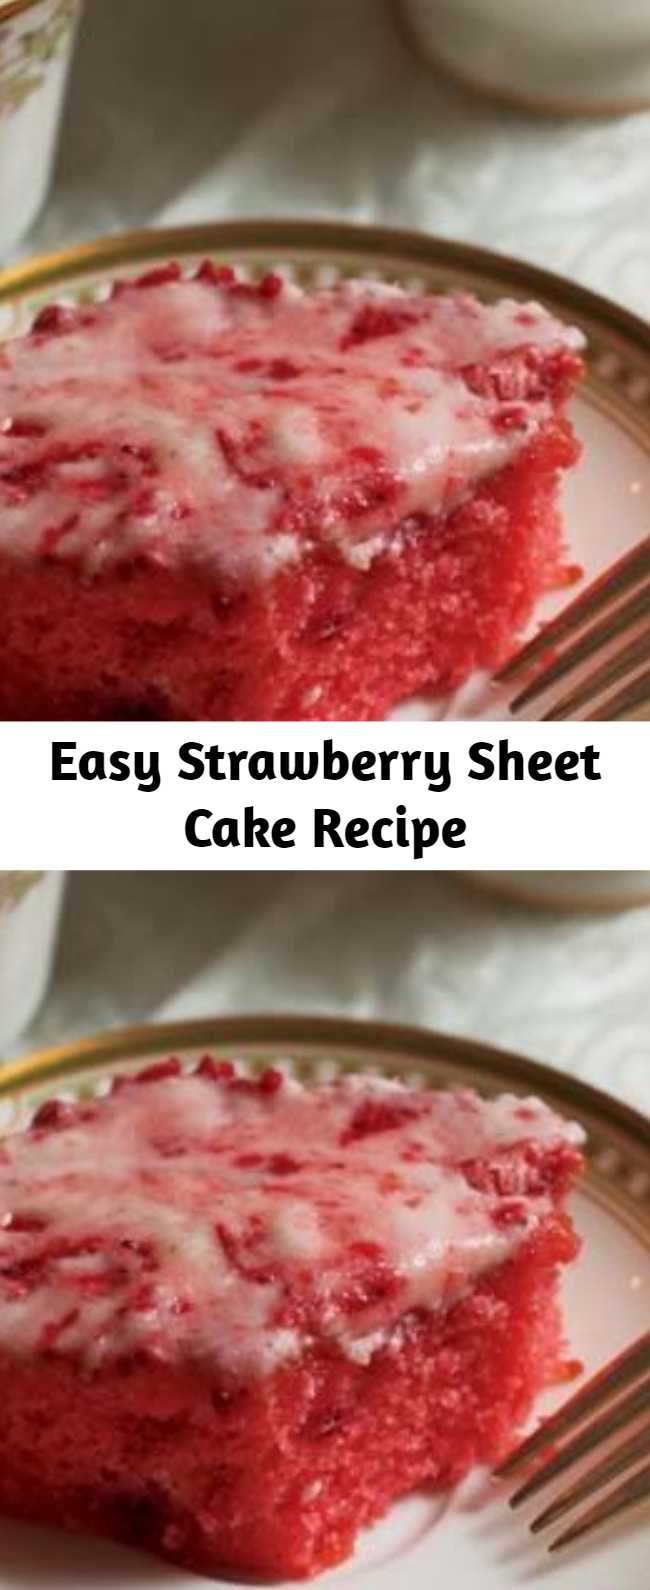 This pink cake with mashed sweetened strawberries and strawberry jello just tastes like summertime.